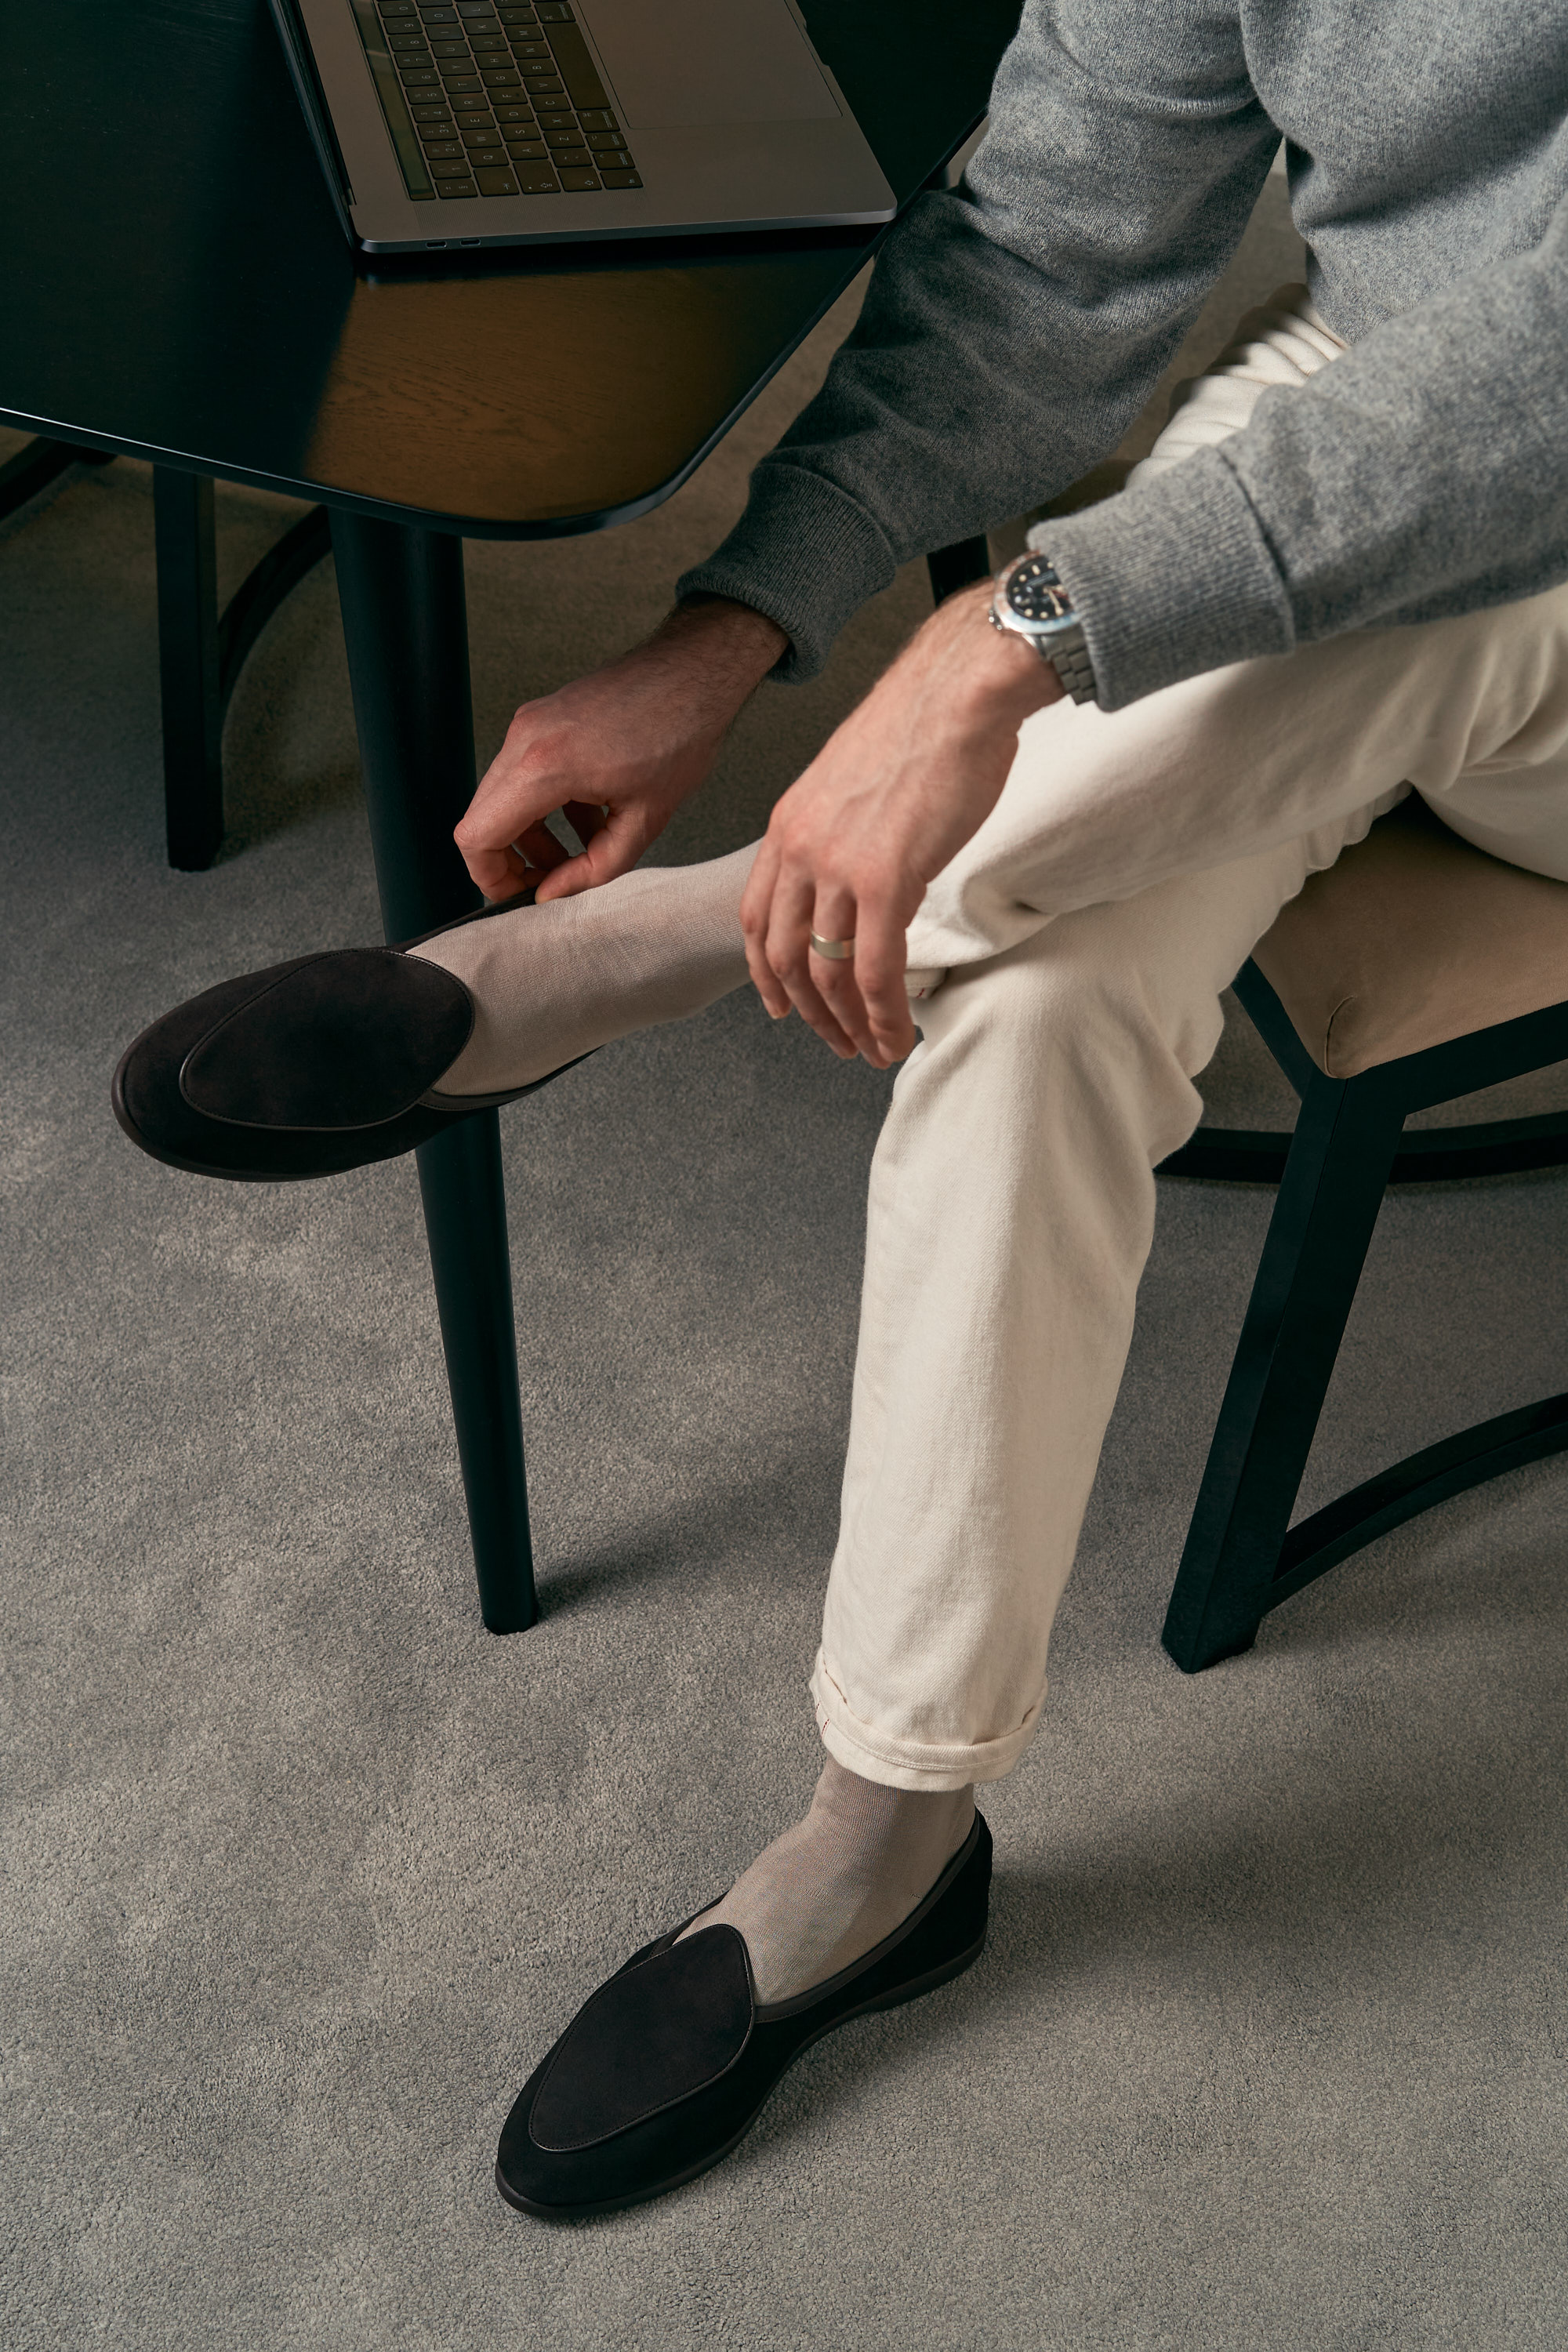 Pyjamas and working from home: Baudoin & Lange Lunes – Permanent Style